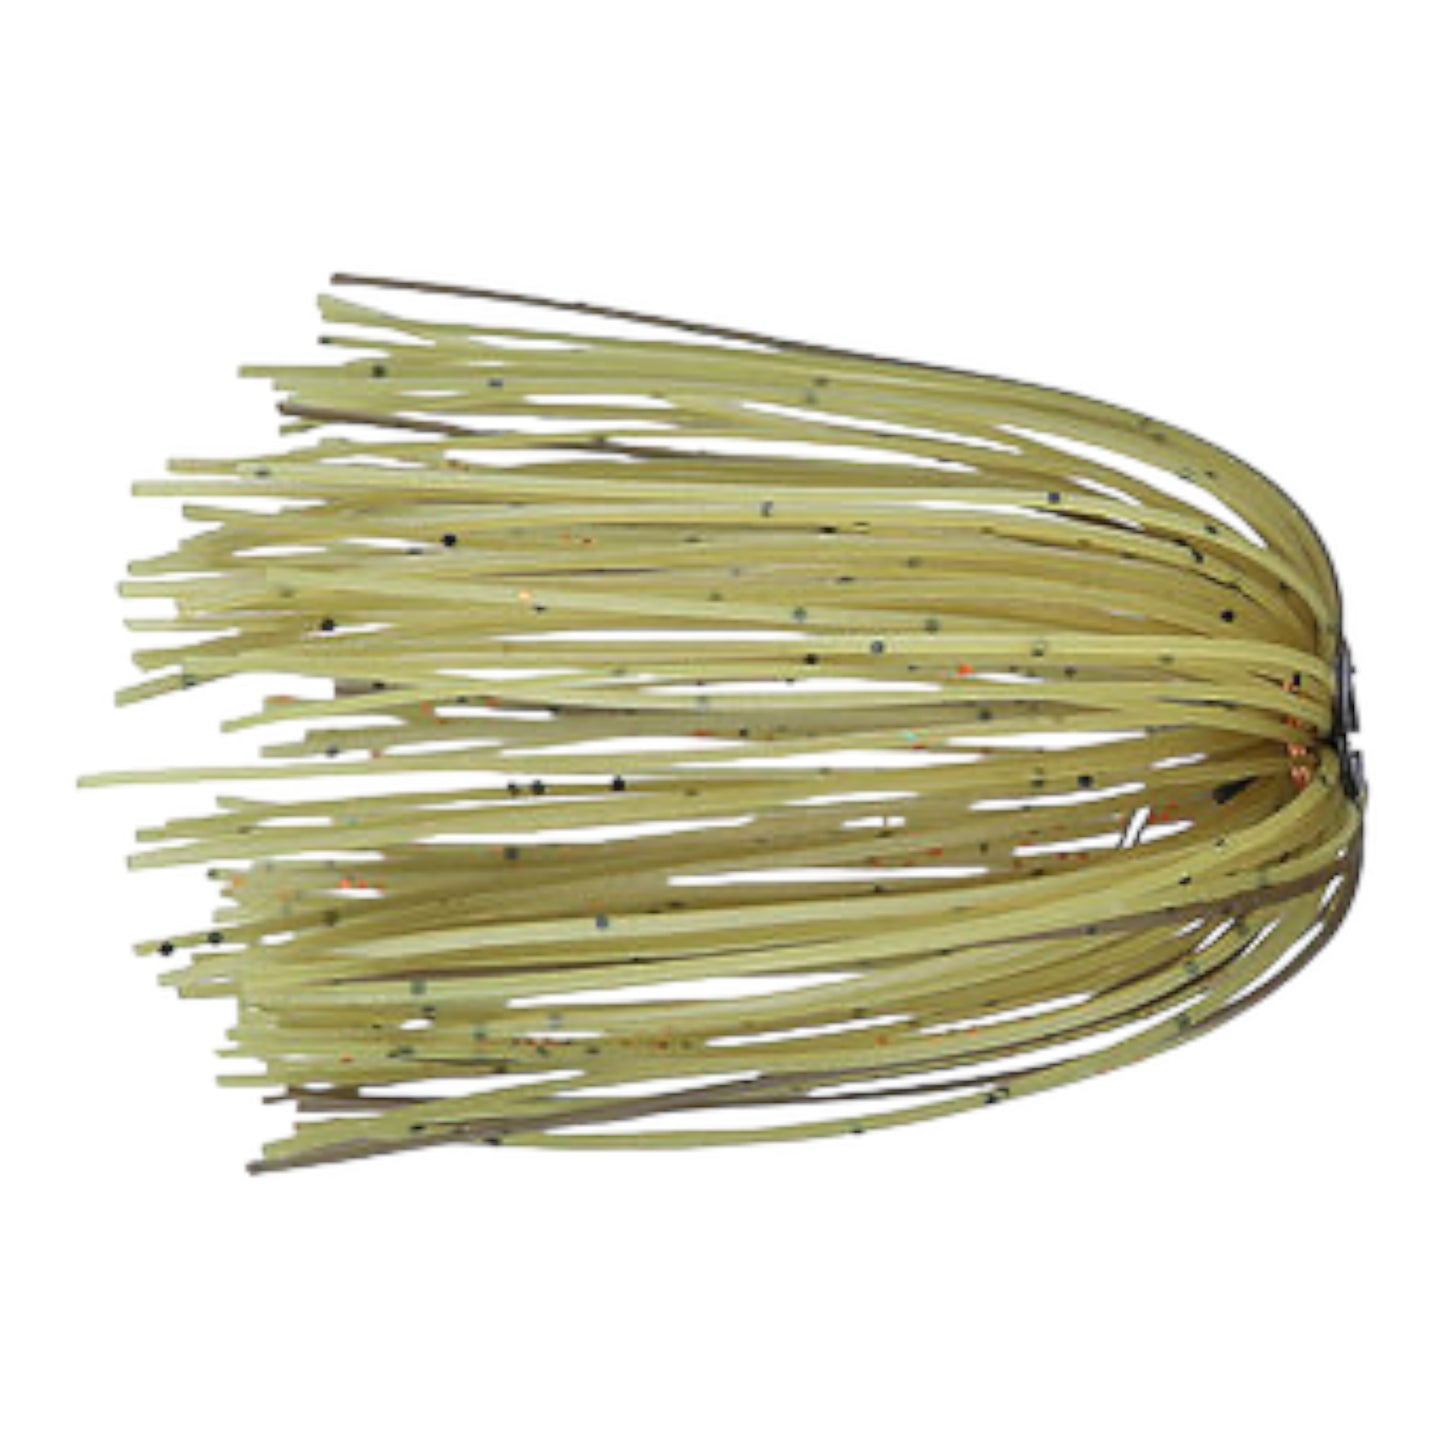 Lifted Jigs Knock Out Punch Skirts Copper Wire Tied